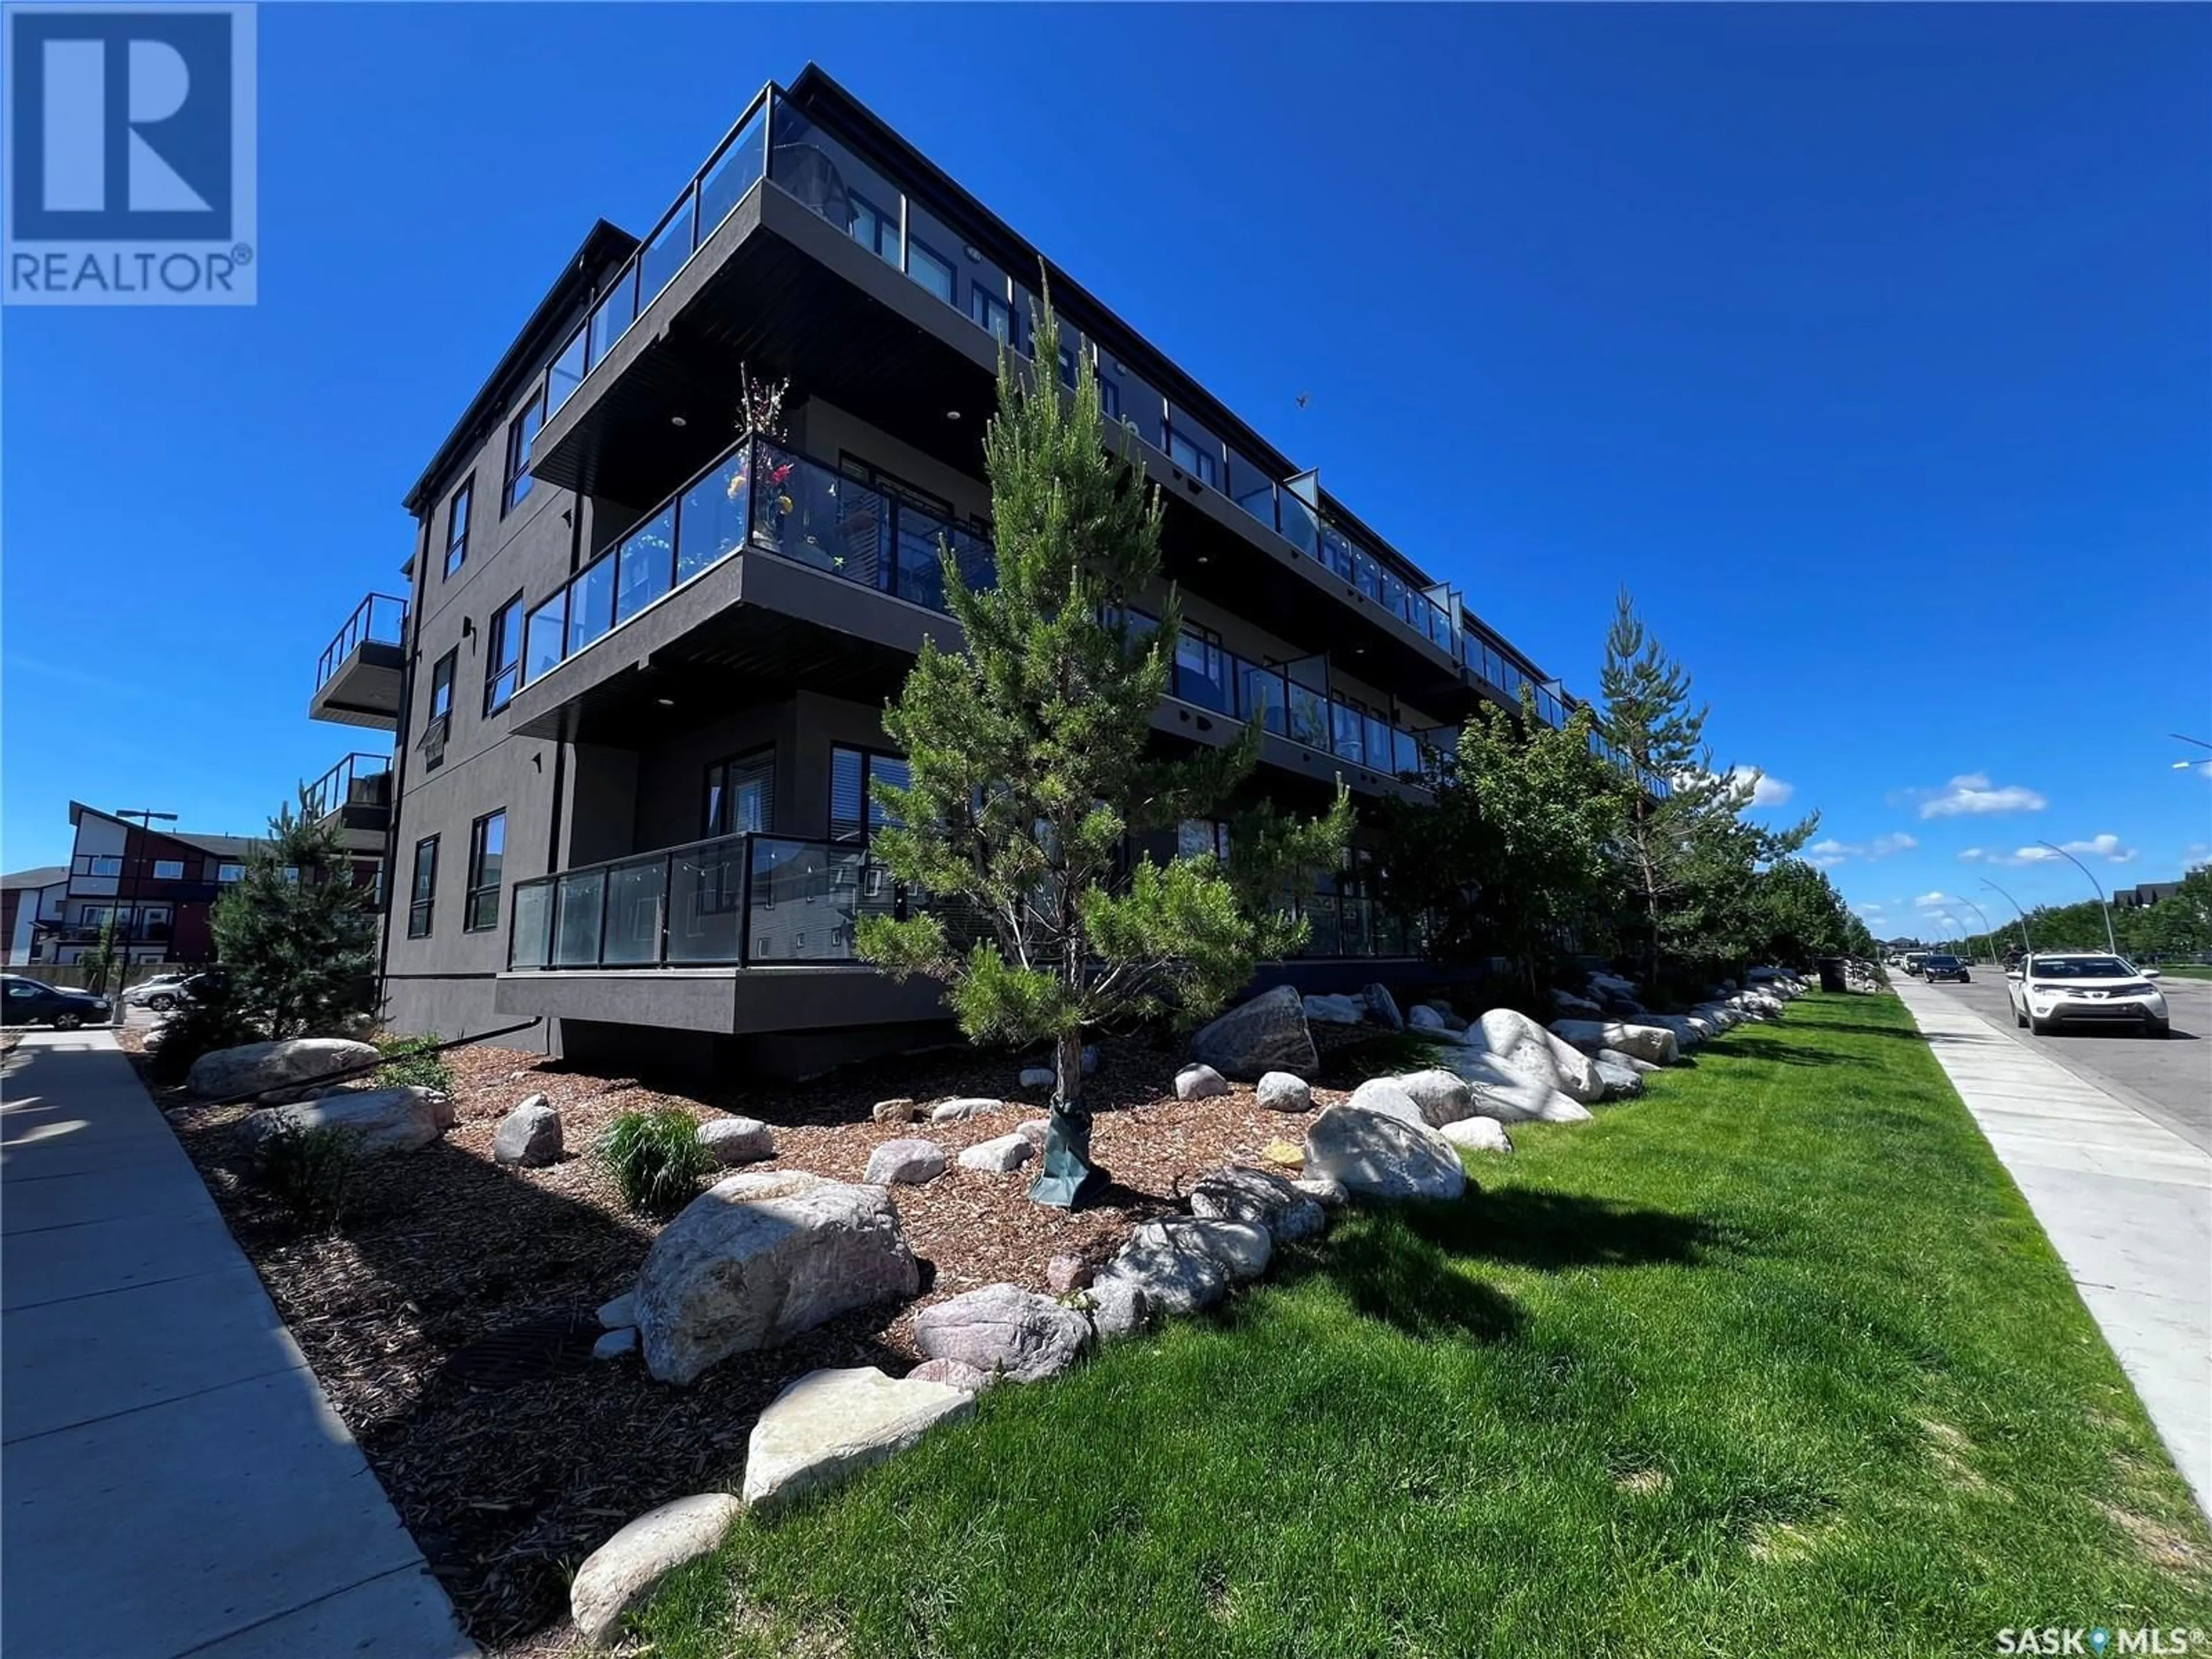 A pic from exterior of the house or condo for 103 415 Maningas BEND, Saskatoon Saskatchewan S7W0T6